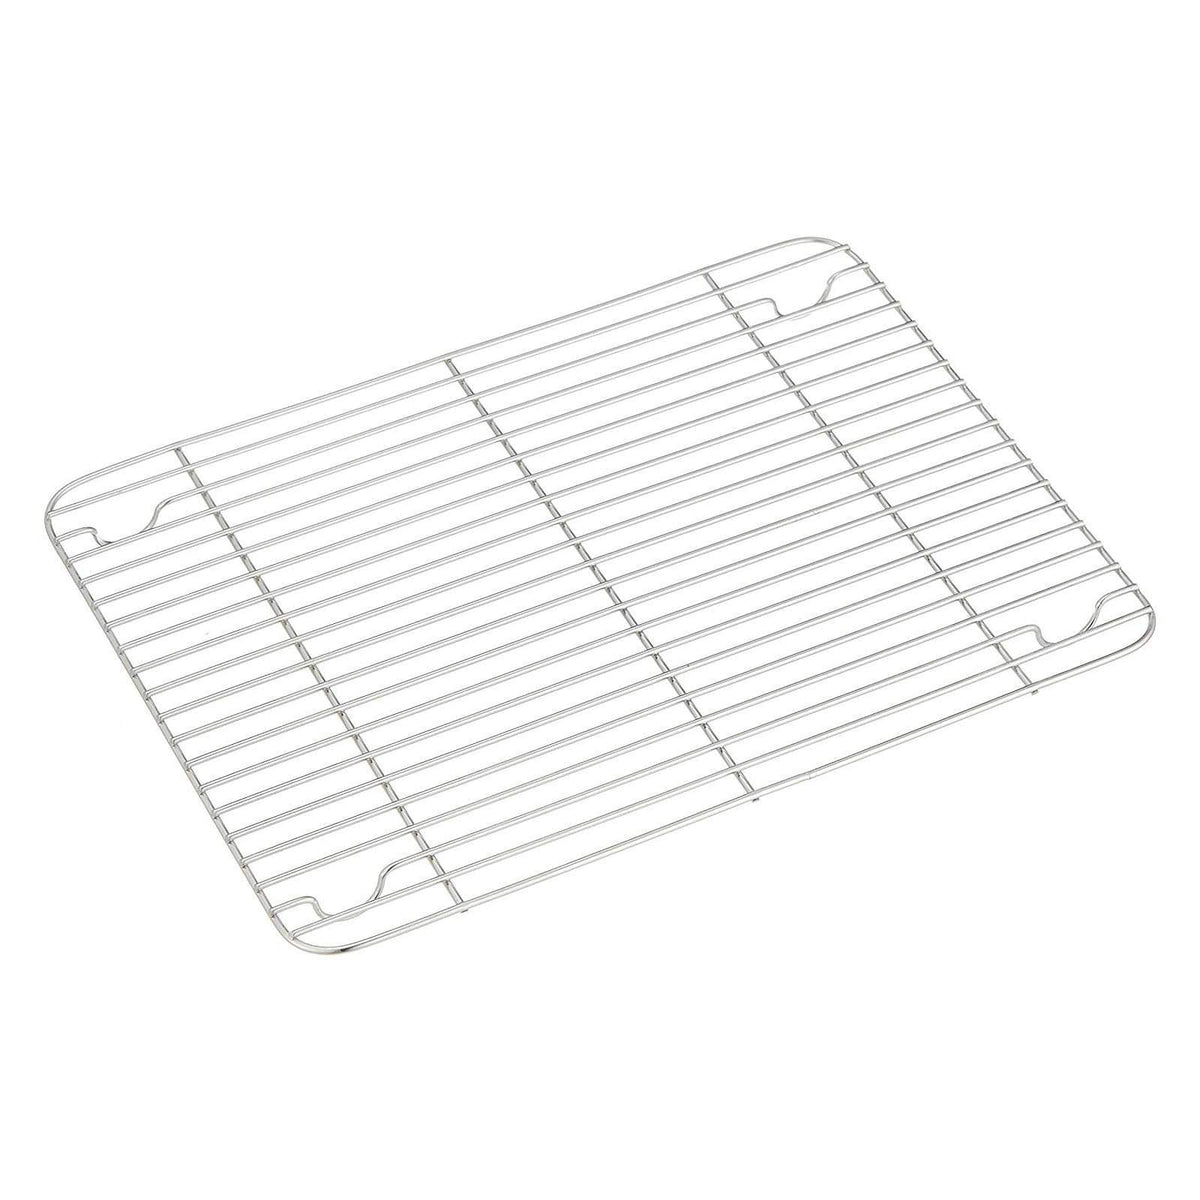 Ikeda Ecoclean Square Mesh Bat Pitch Width 6 mm (9 Sizes) No.7 (228x169mm) Cooling rack